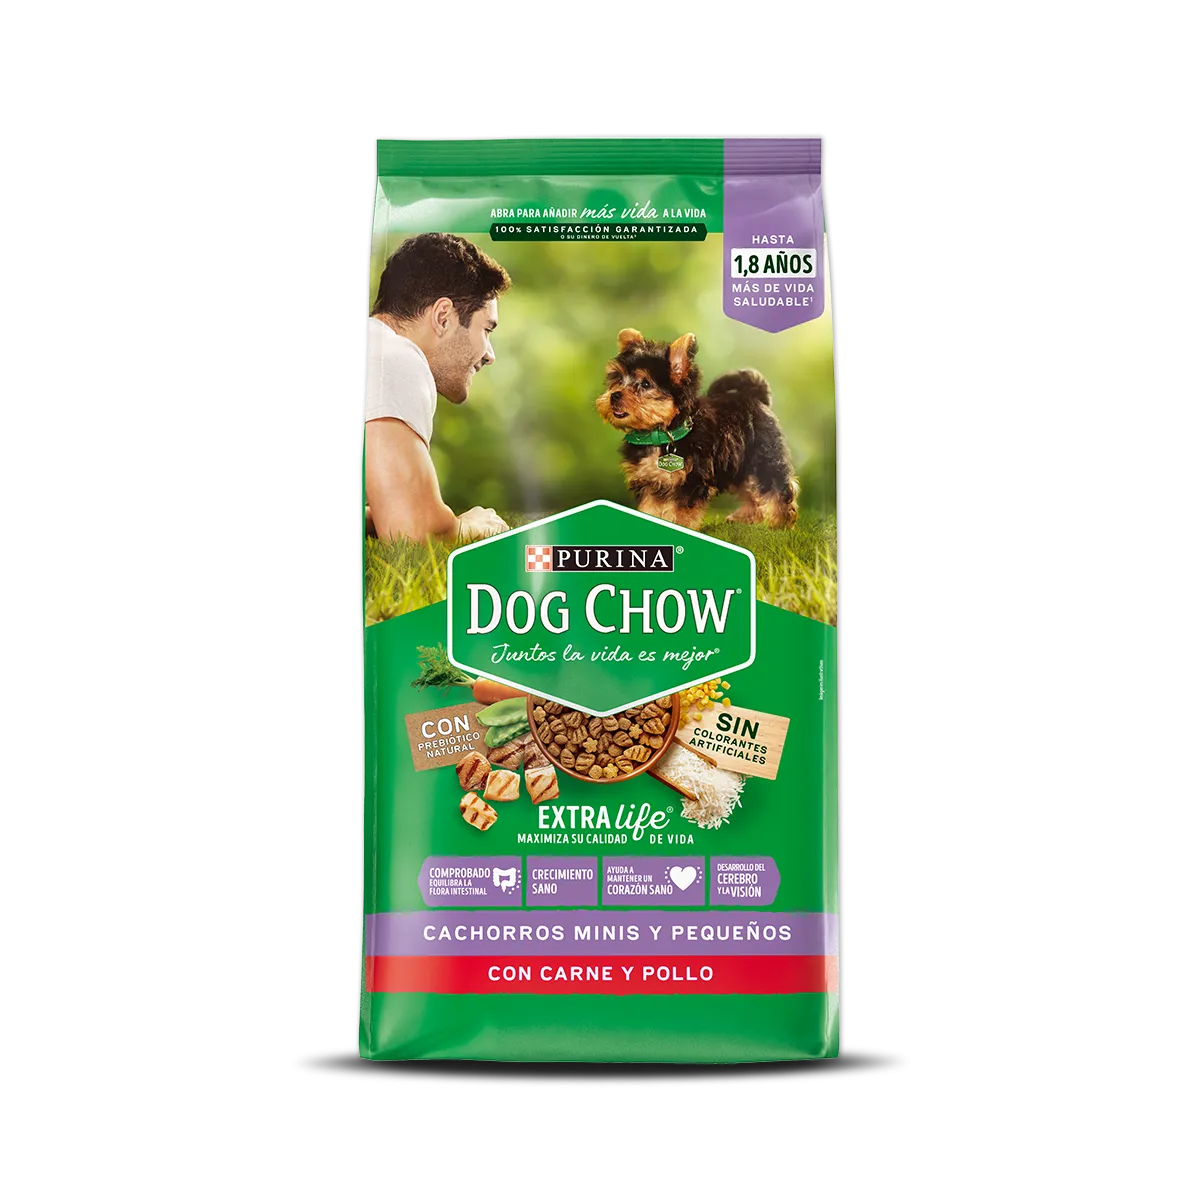 Purina-DogChow-chachorro-minis-colombia.png.webp